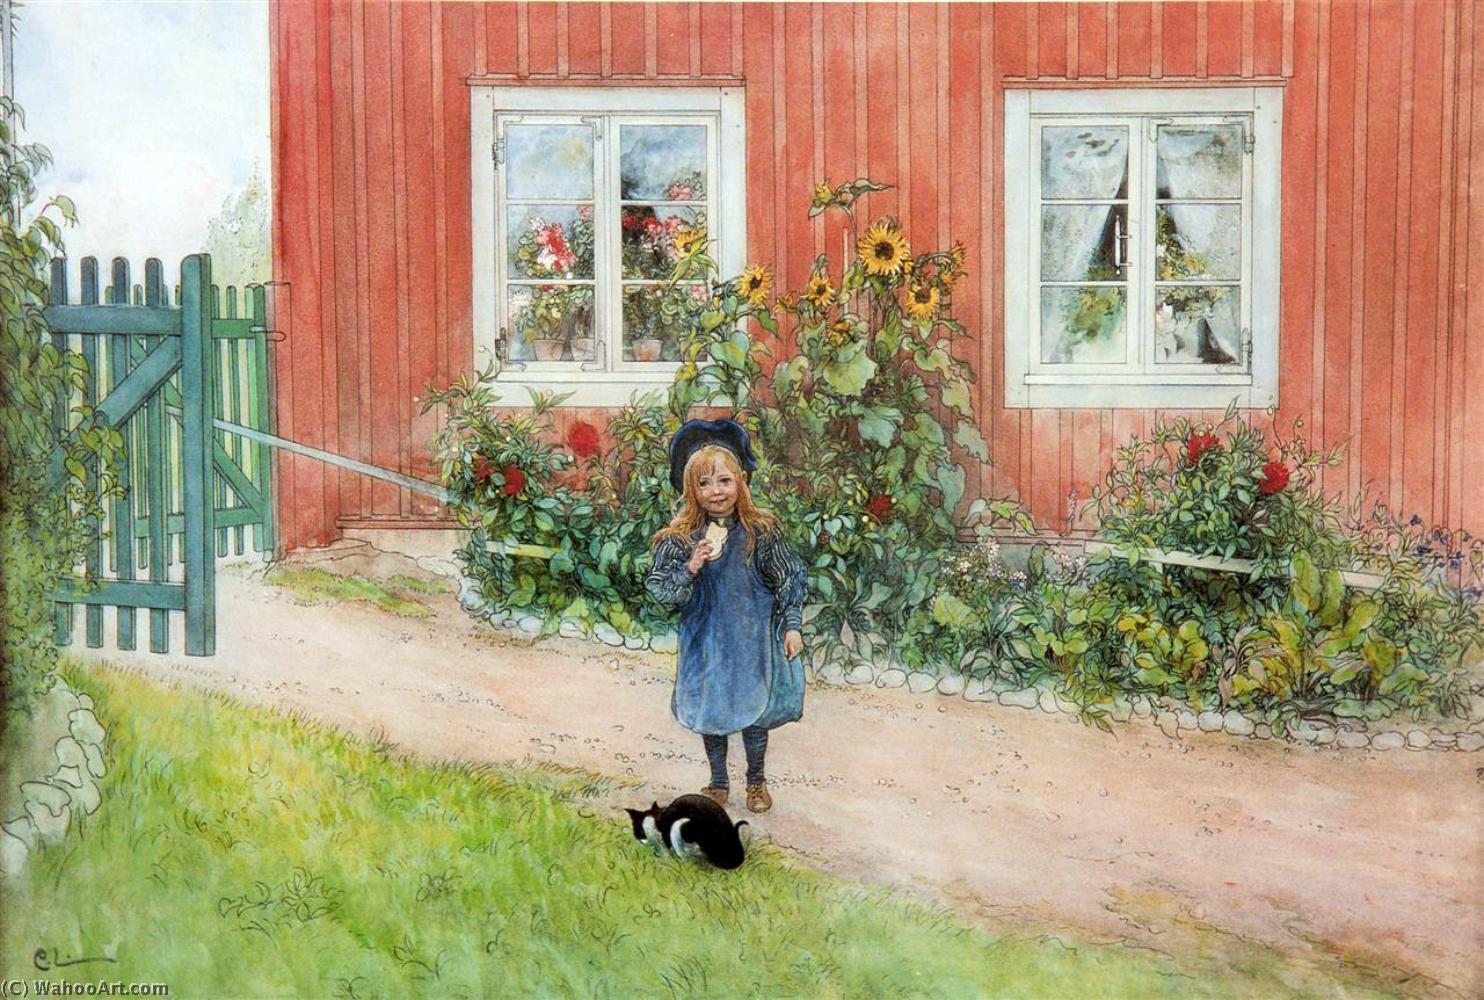 Carl larsson brita with a cat and a sandwich